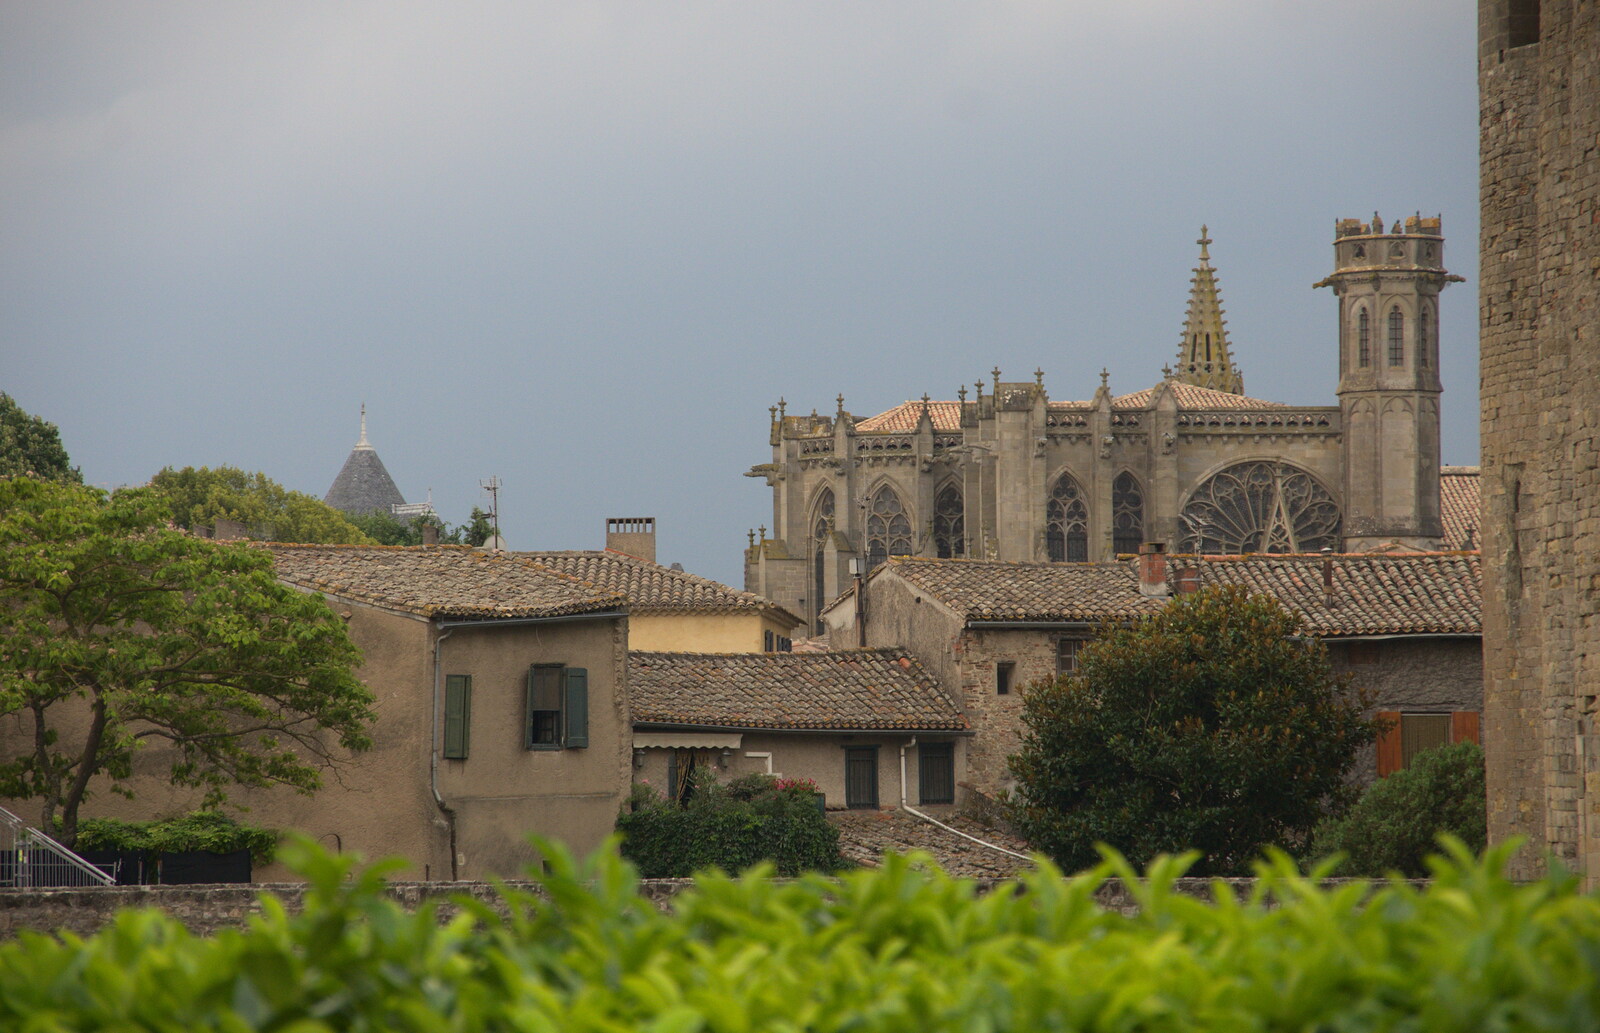 Clouds darken over the Basilique Saint-Nazaire from A Trip to Carcassonne, Aude, France - 8th August 2018